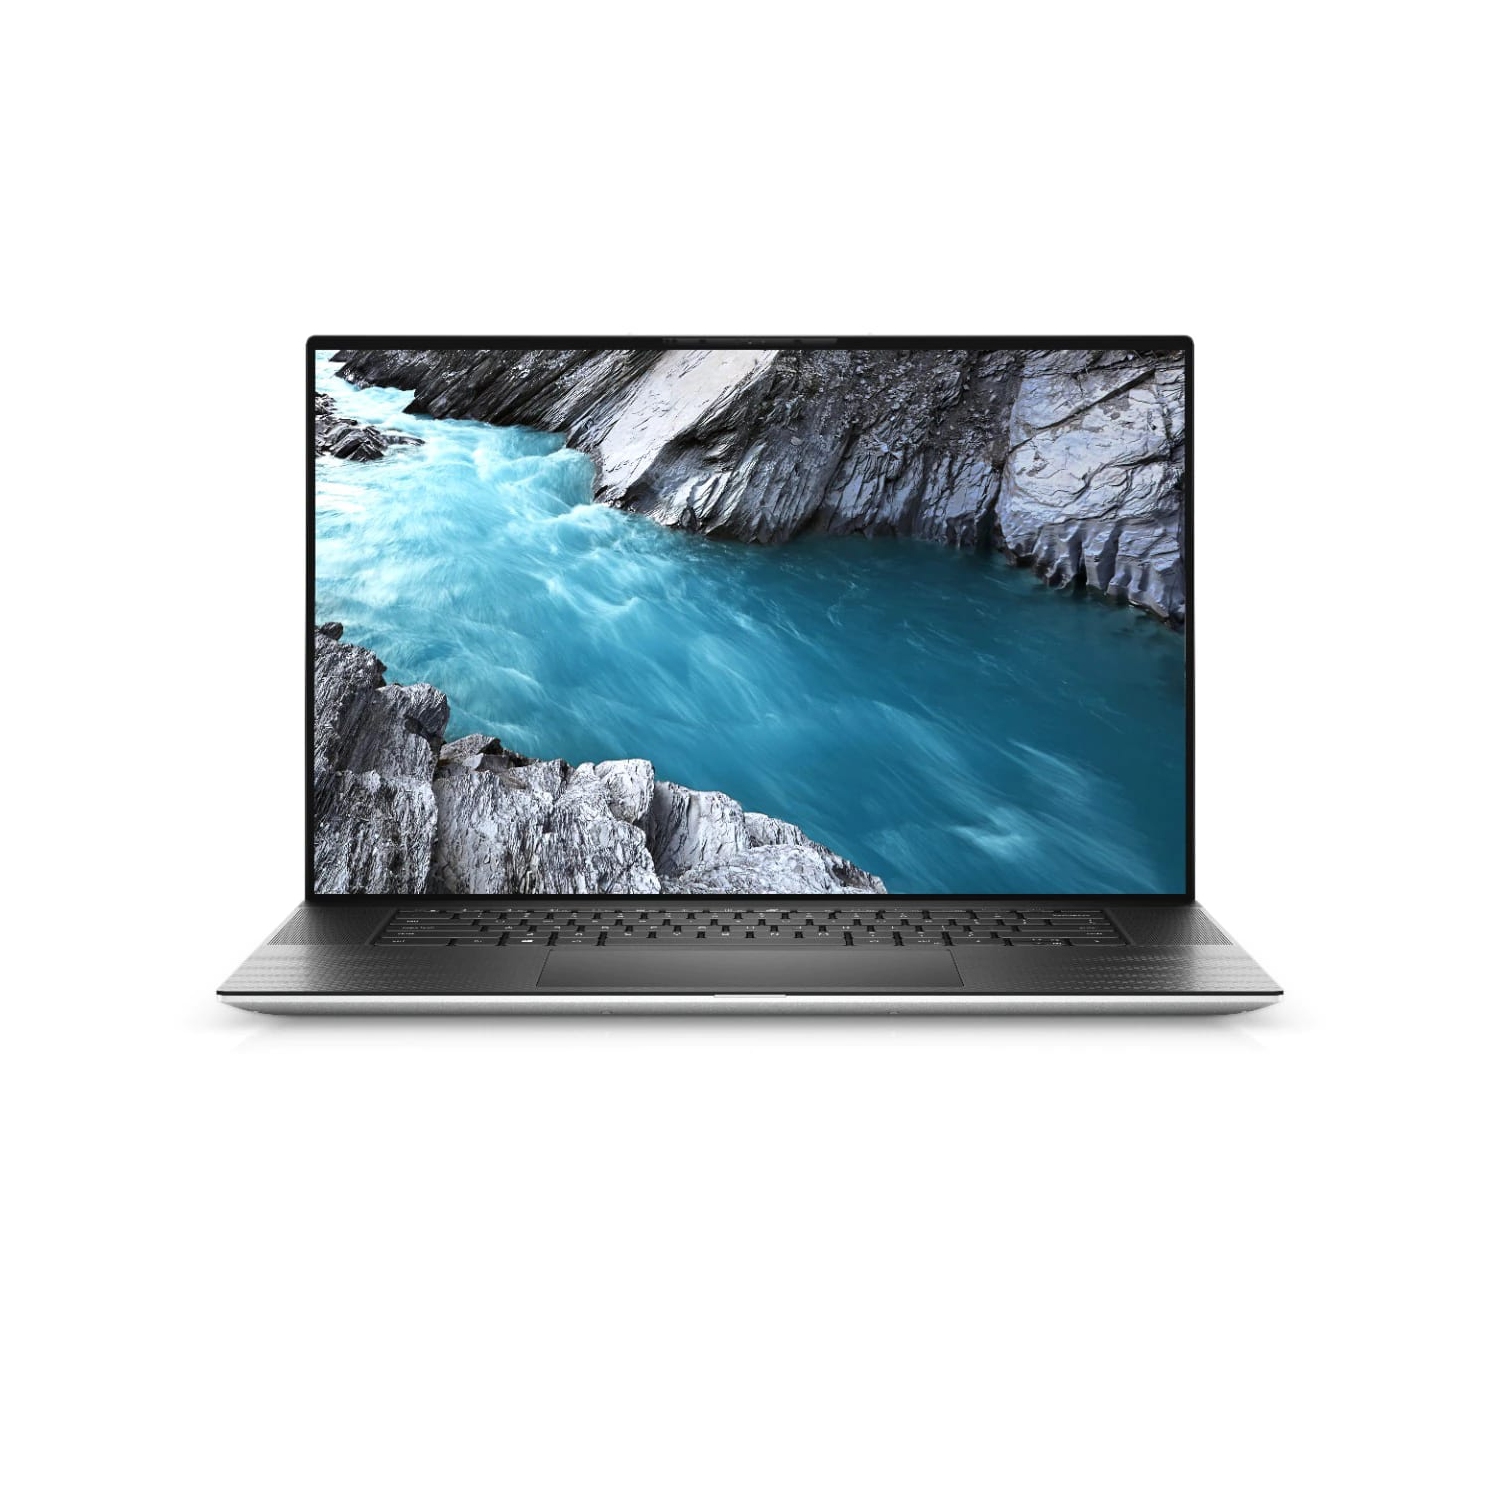 Refurbished (Excellent) – Dell XPS 9700 Laptop (2020) | 17" FHD+ | Core i9 - 512GB SSD - 32GB RAM - RTX 2060 | 8 Cores @ 5.3 GHz - 10th Gen CPU - 6GB GDDR6